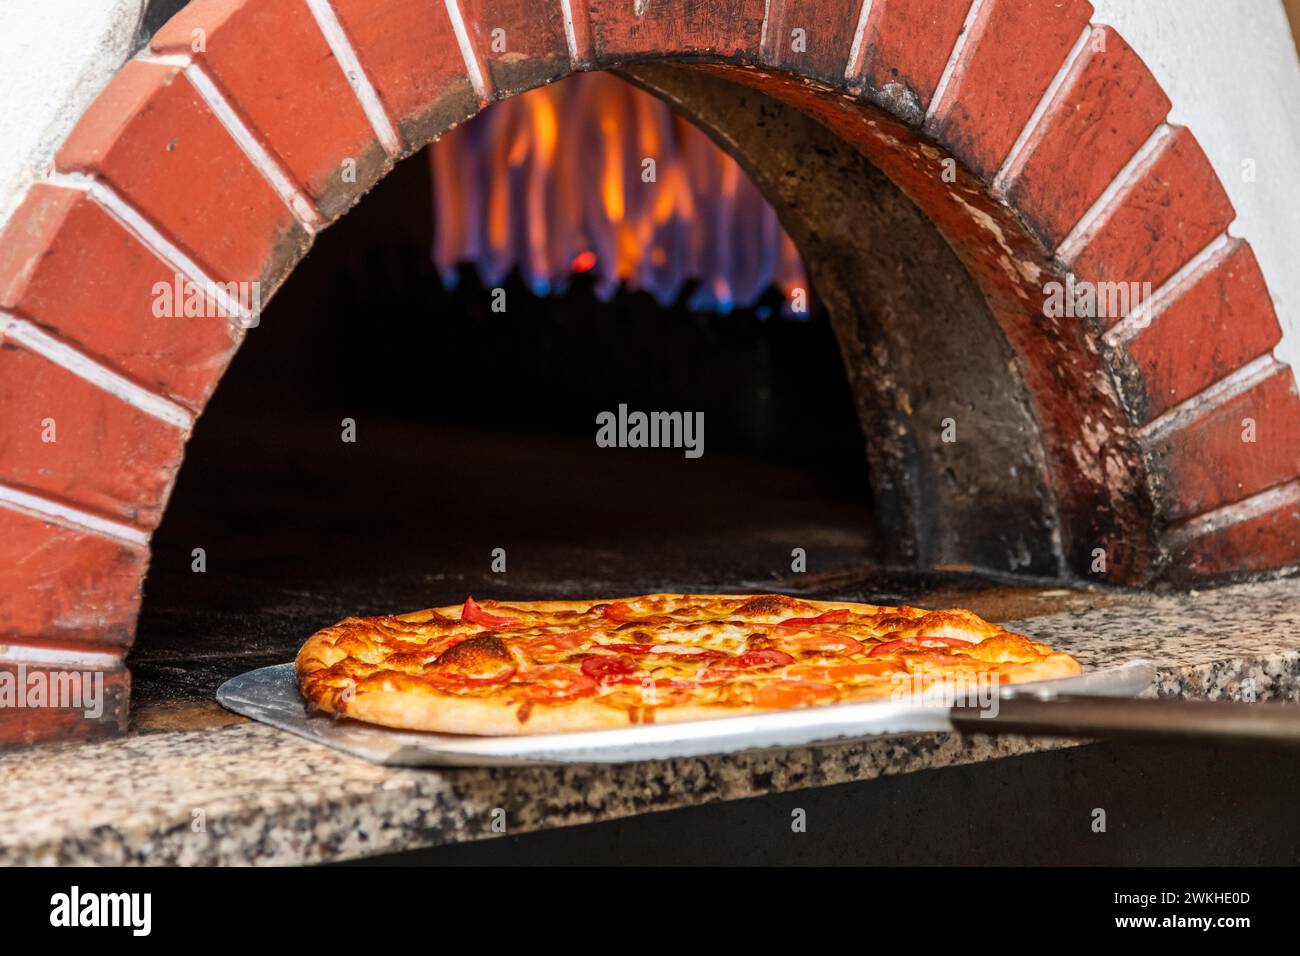 Mixed pizza fresh from the pizza oven with flames visible in the background Stock Photo